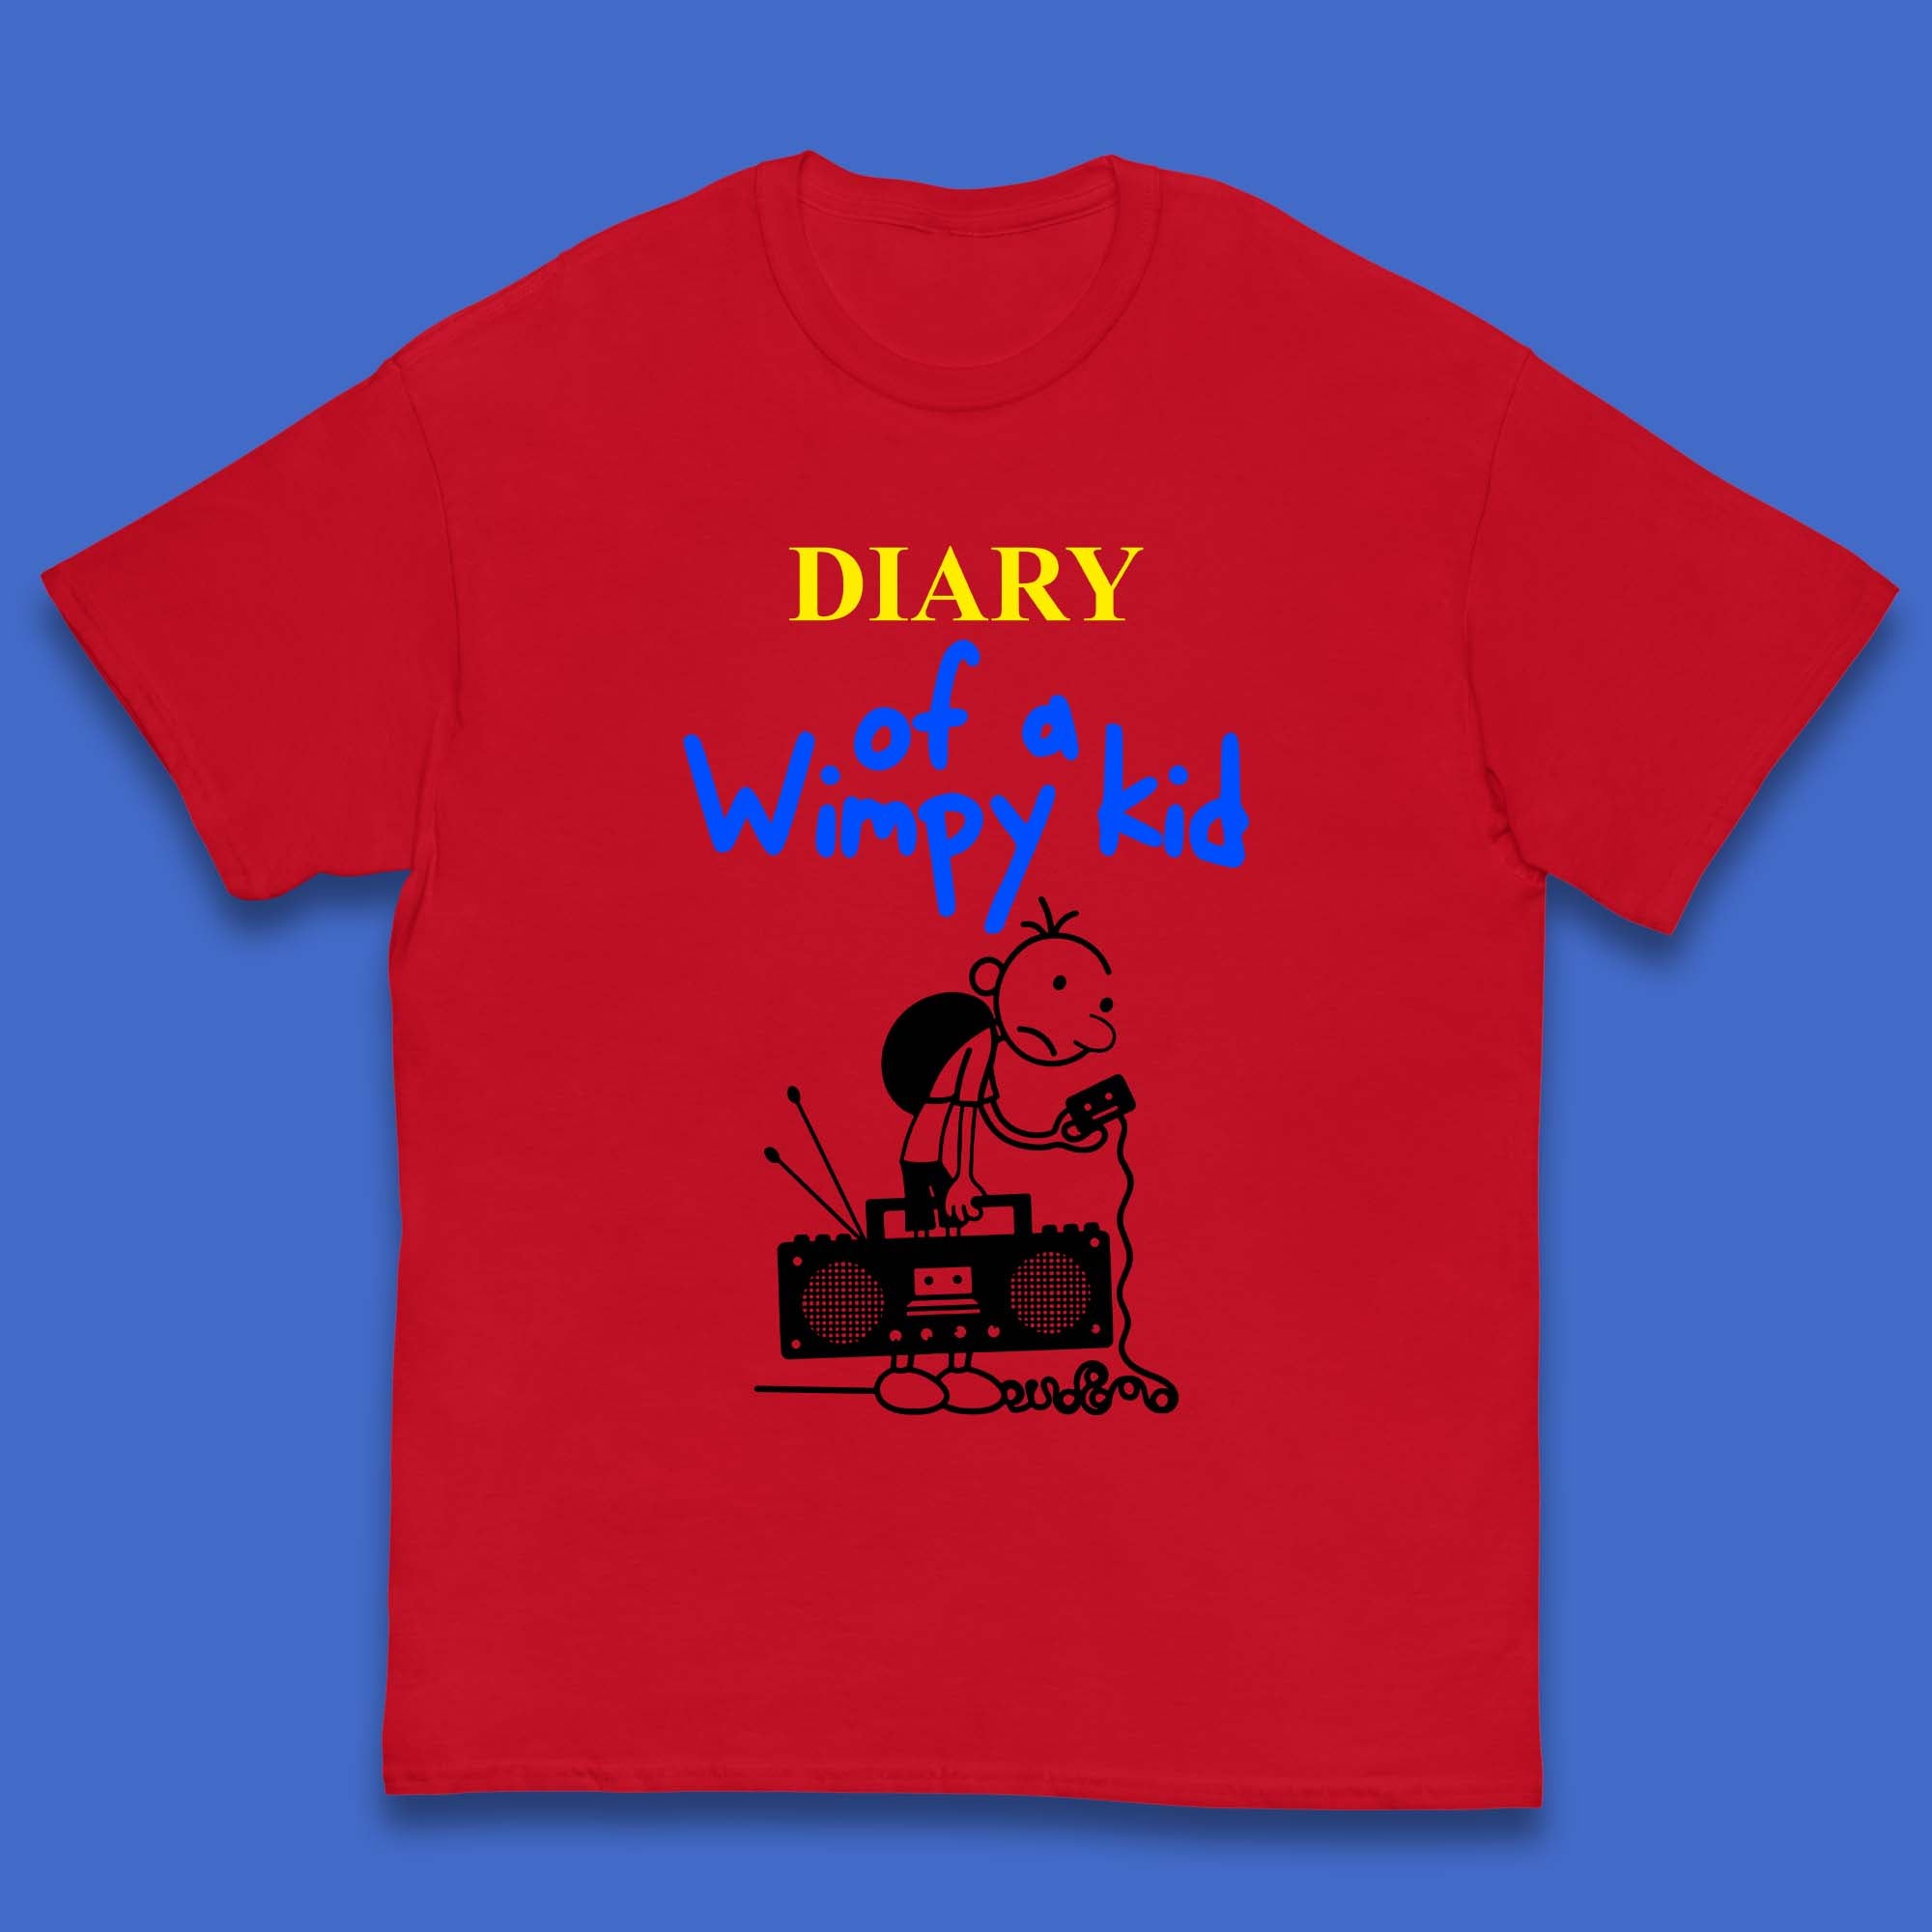 Diary of a Wimpy Kid Childrens T Shirt UK